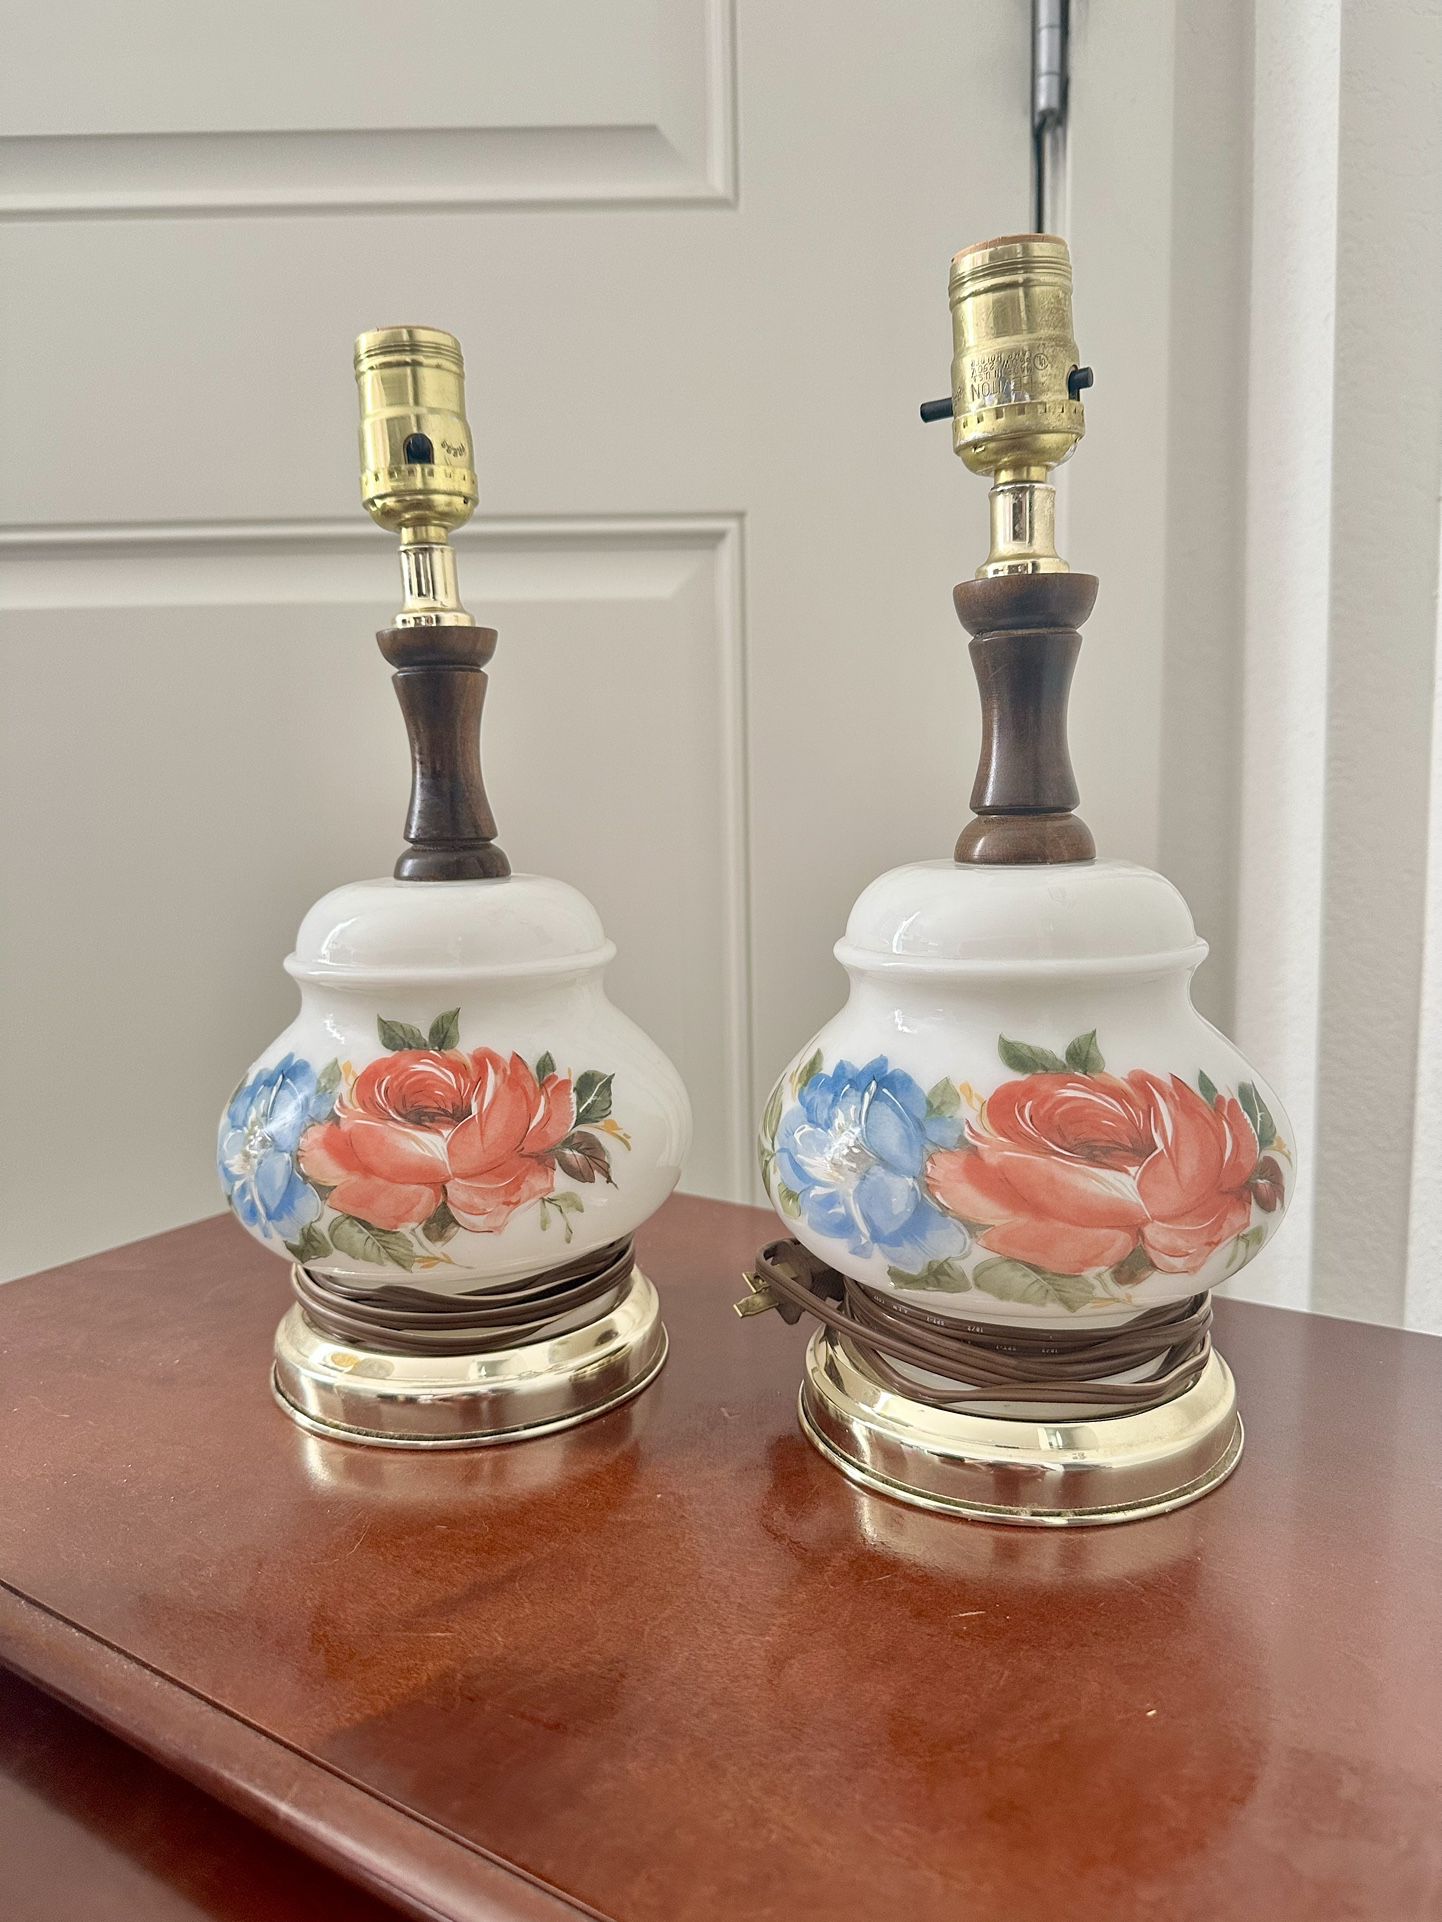 Vintage Hand-painted Milk Glass Lamps